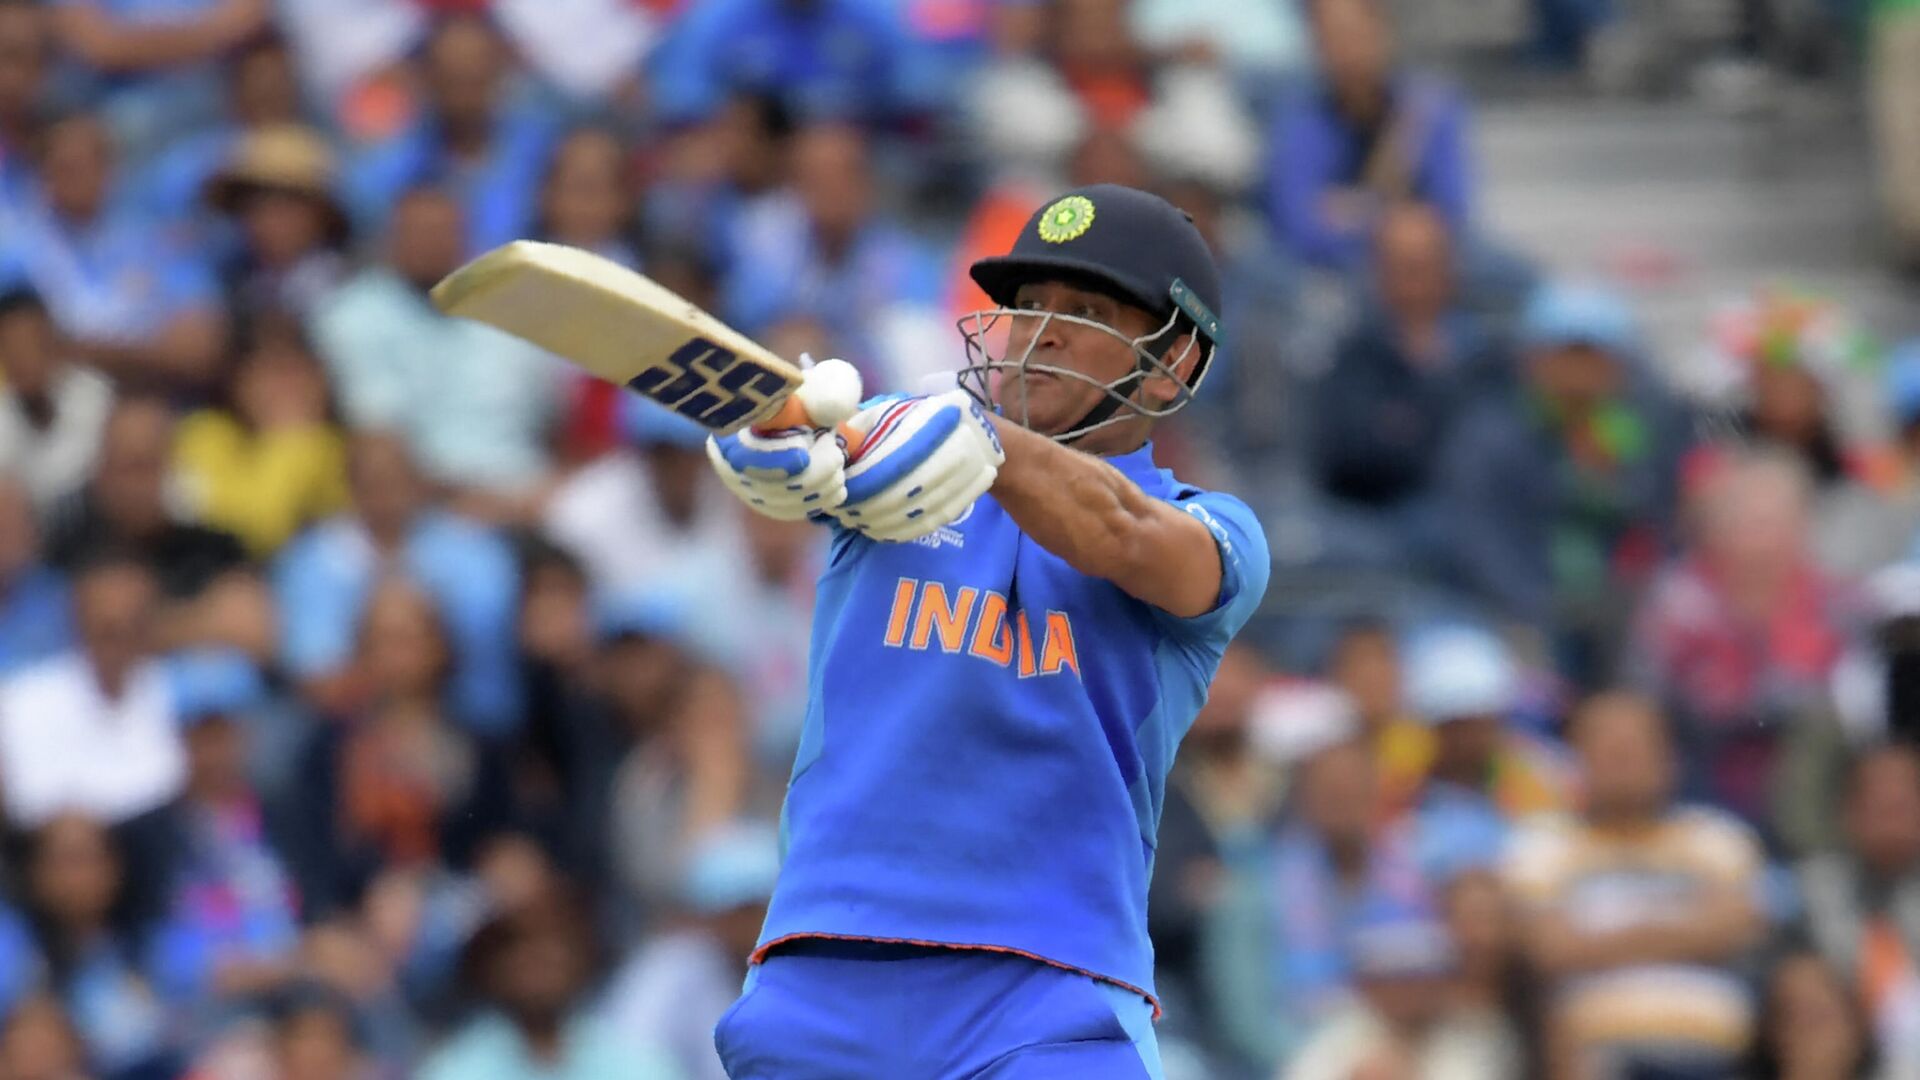 India's Mahendra Singh Dhoni plays a shot during the 2019 Cricket World Cup first semi-final between New Zealand and India at Old Trafford in Manchester, northwest England, on July 10, 2019 - Sputnik International, 1920, 05.10.2021